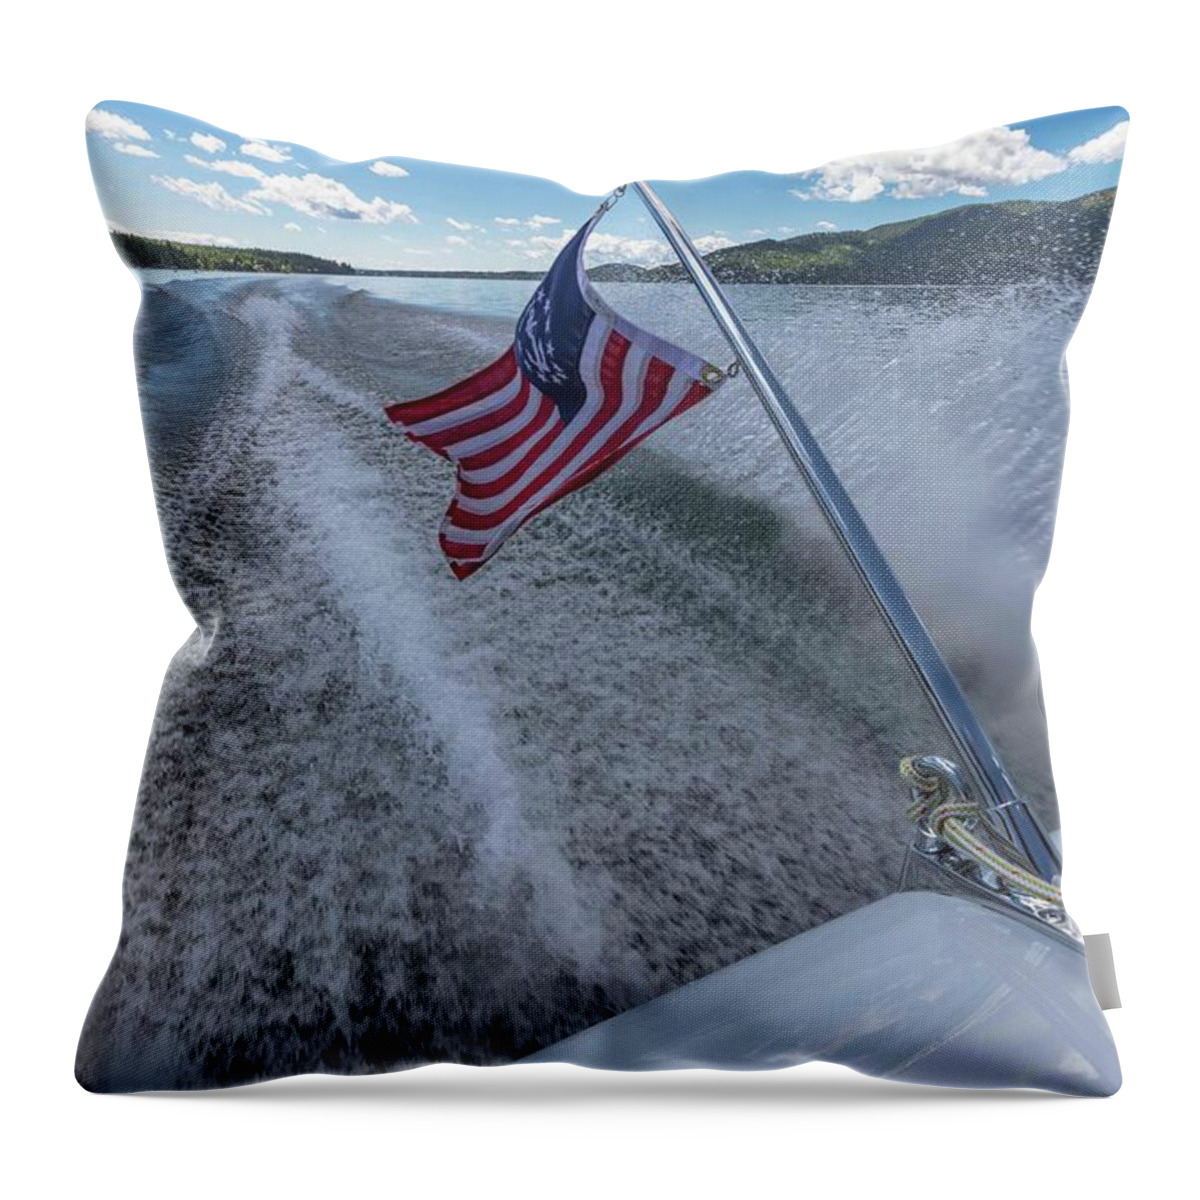 Boat Throw Pillow featuring the photograph 364 by Steven Lapkin